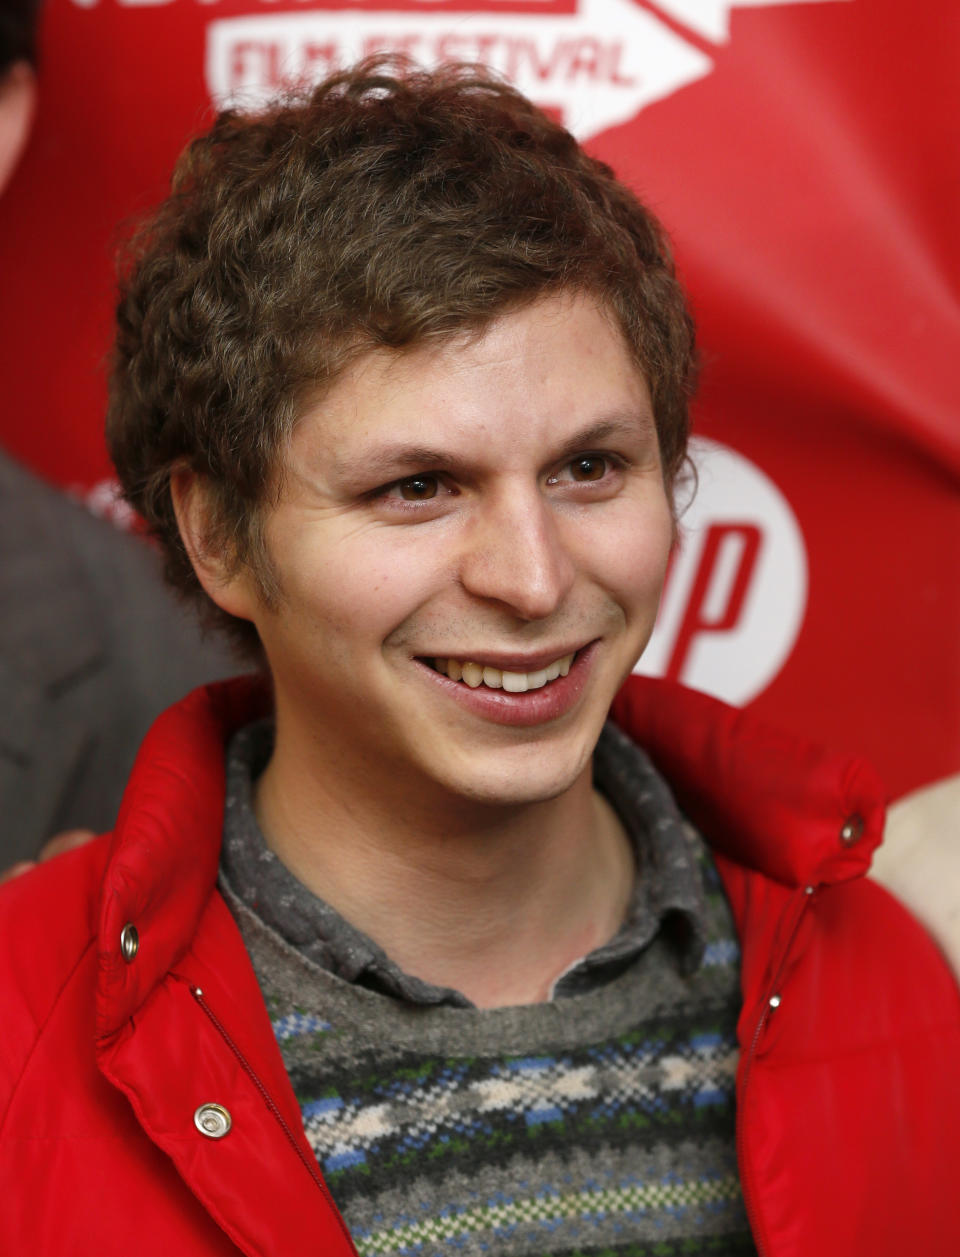 Cast member Michael Cera poses at the premiere of "Crystal Fairy" during the 2013 Sundance Film Festival on Thursday, Jan. 17, 2013 in Park City, Utah. (Photo by Danny Moloshok/Invision/AP)